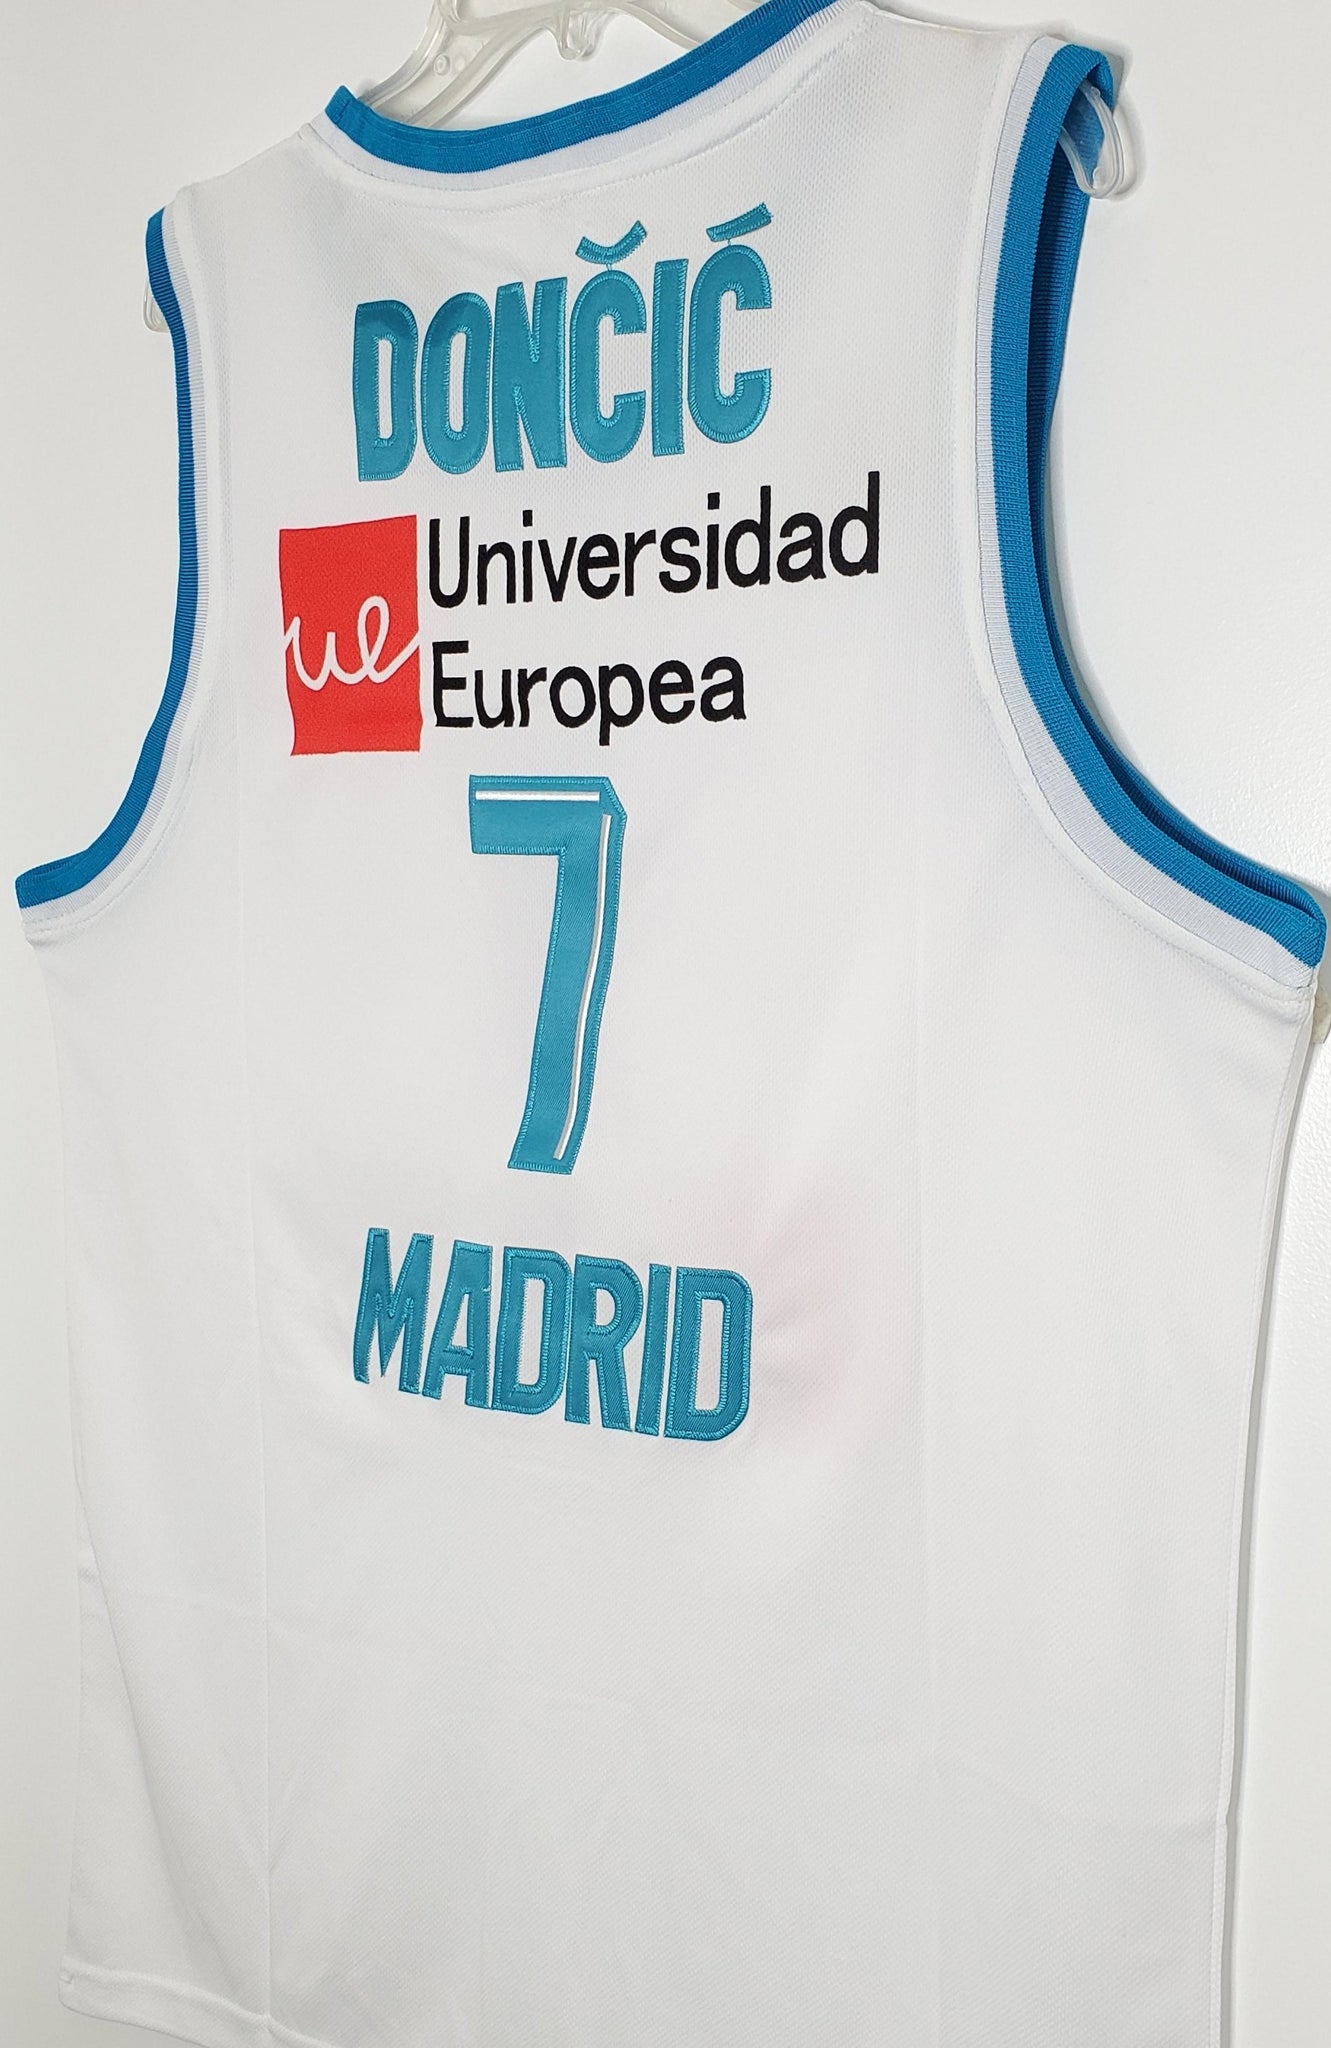 Real Madrid Luka Doncic Jersey Size 38 Men Small